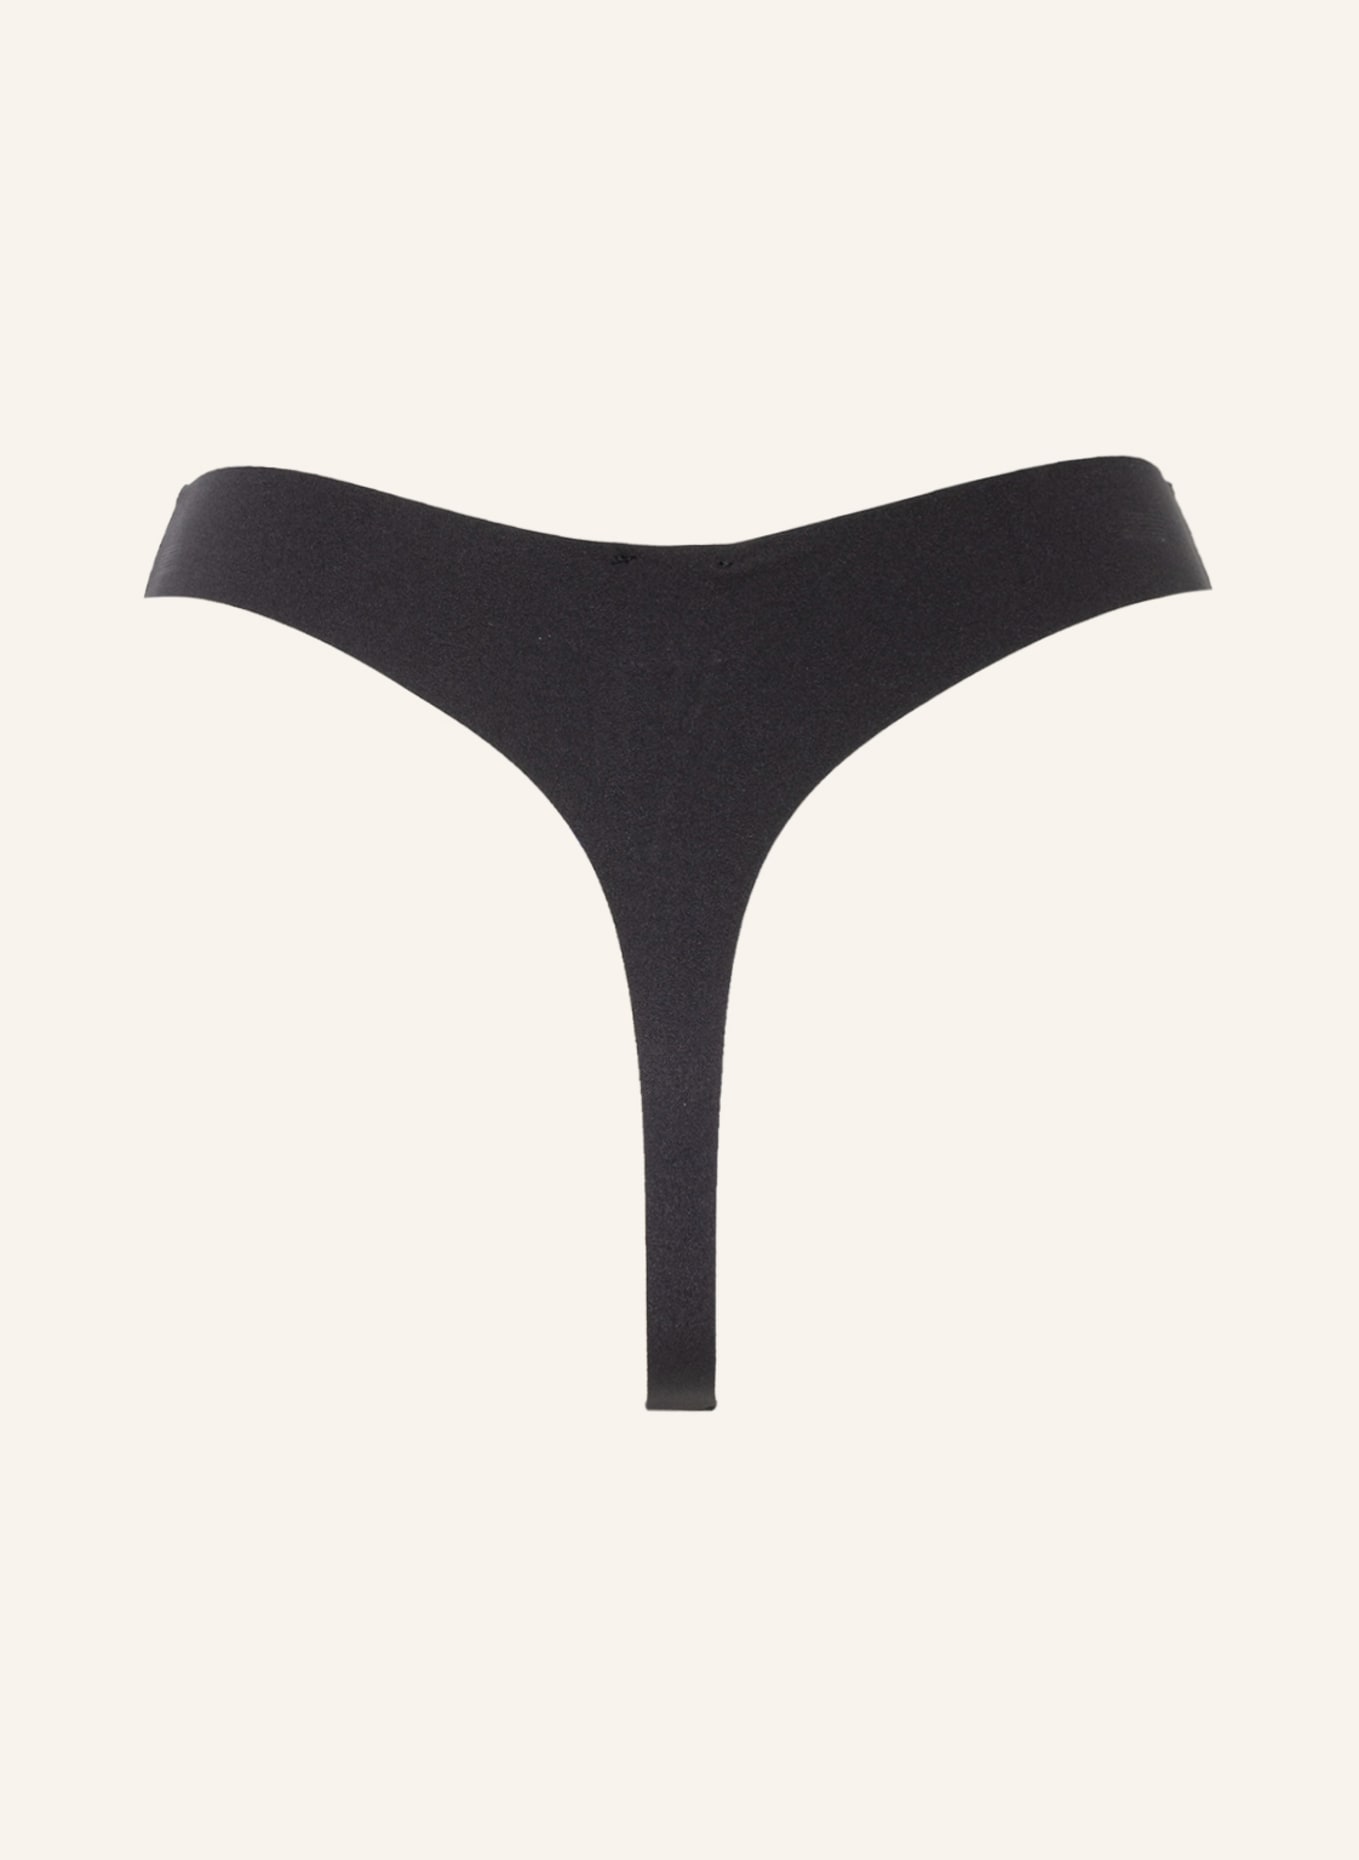 adidas 2-pack in of black thongs high-waisted